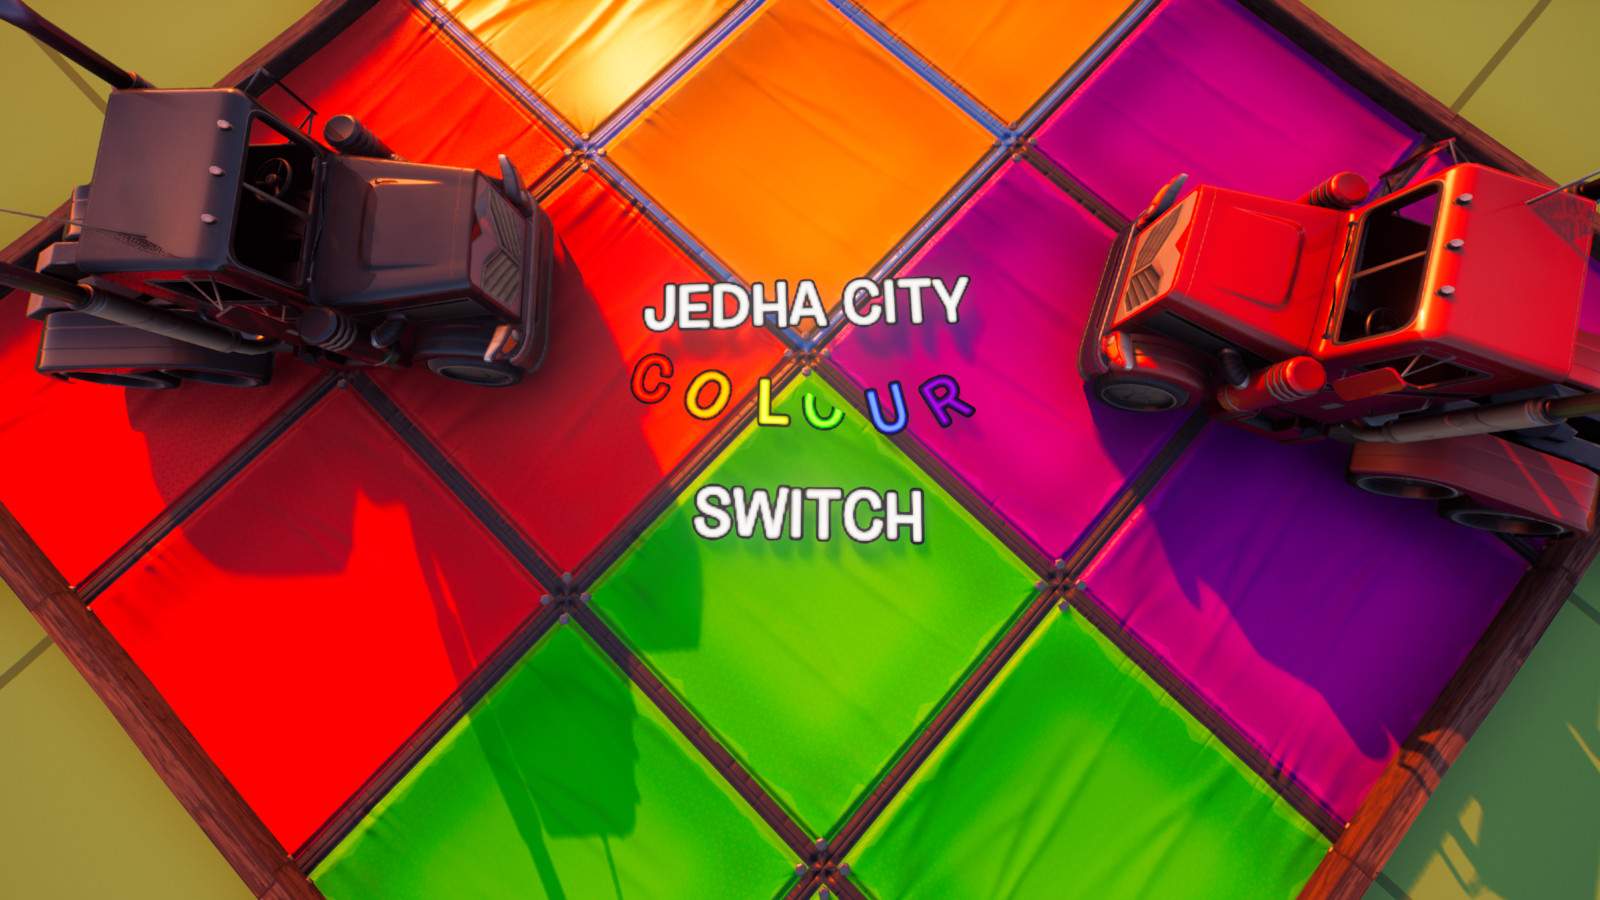 JEDHA CITY - 🚚TRUCK🚚 COLOR SWITCH!